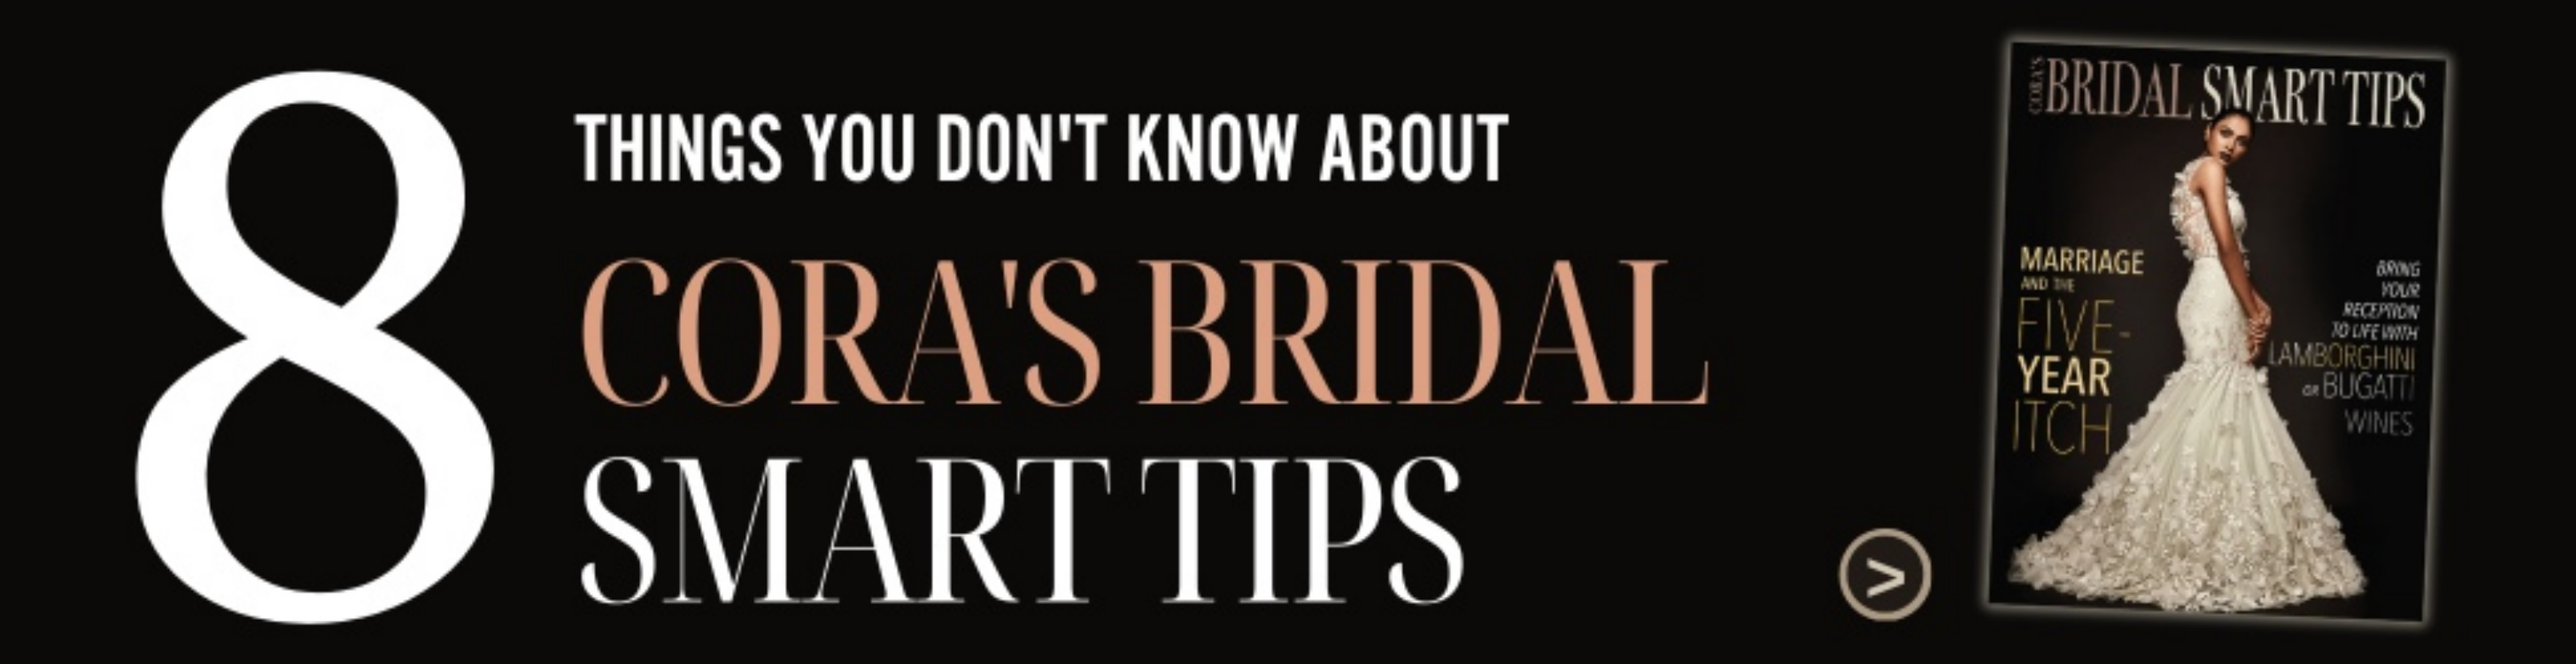 8 THINGS YOU DON’T KNOW ABOUT CORA’S BRIDAL SMART TIPS